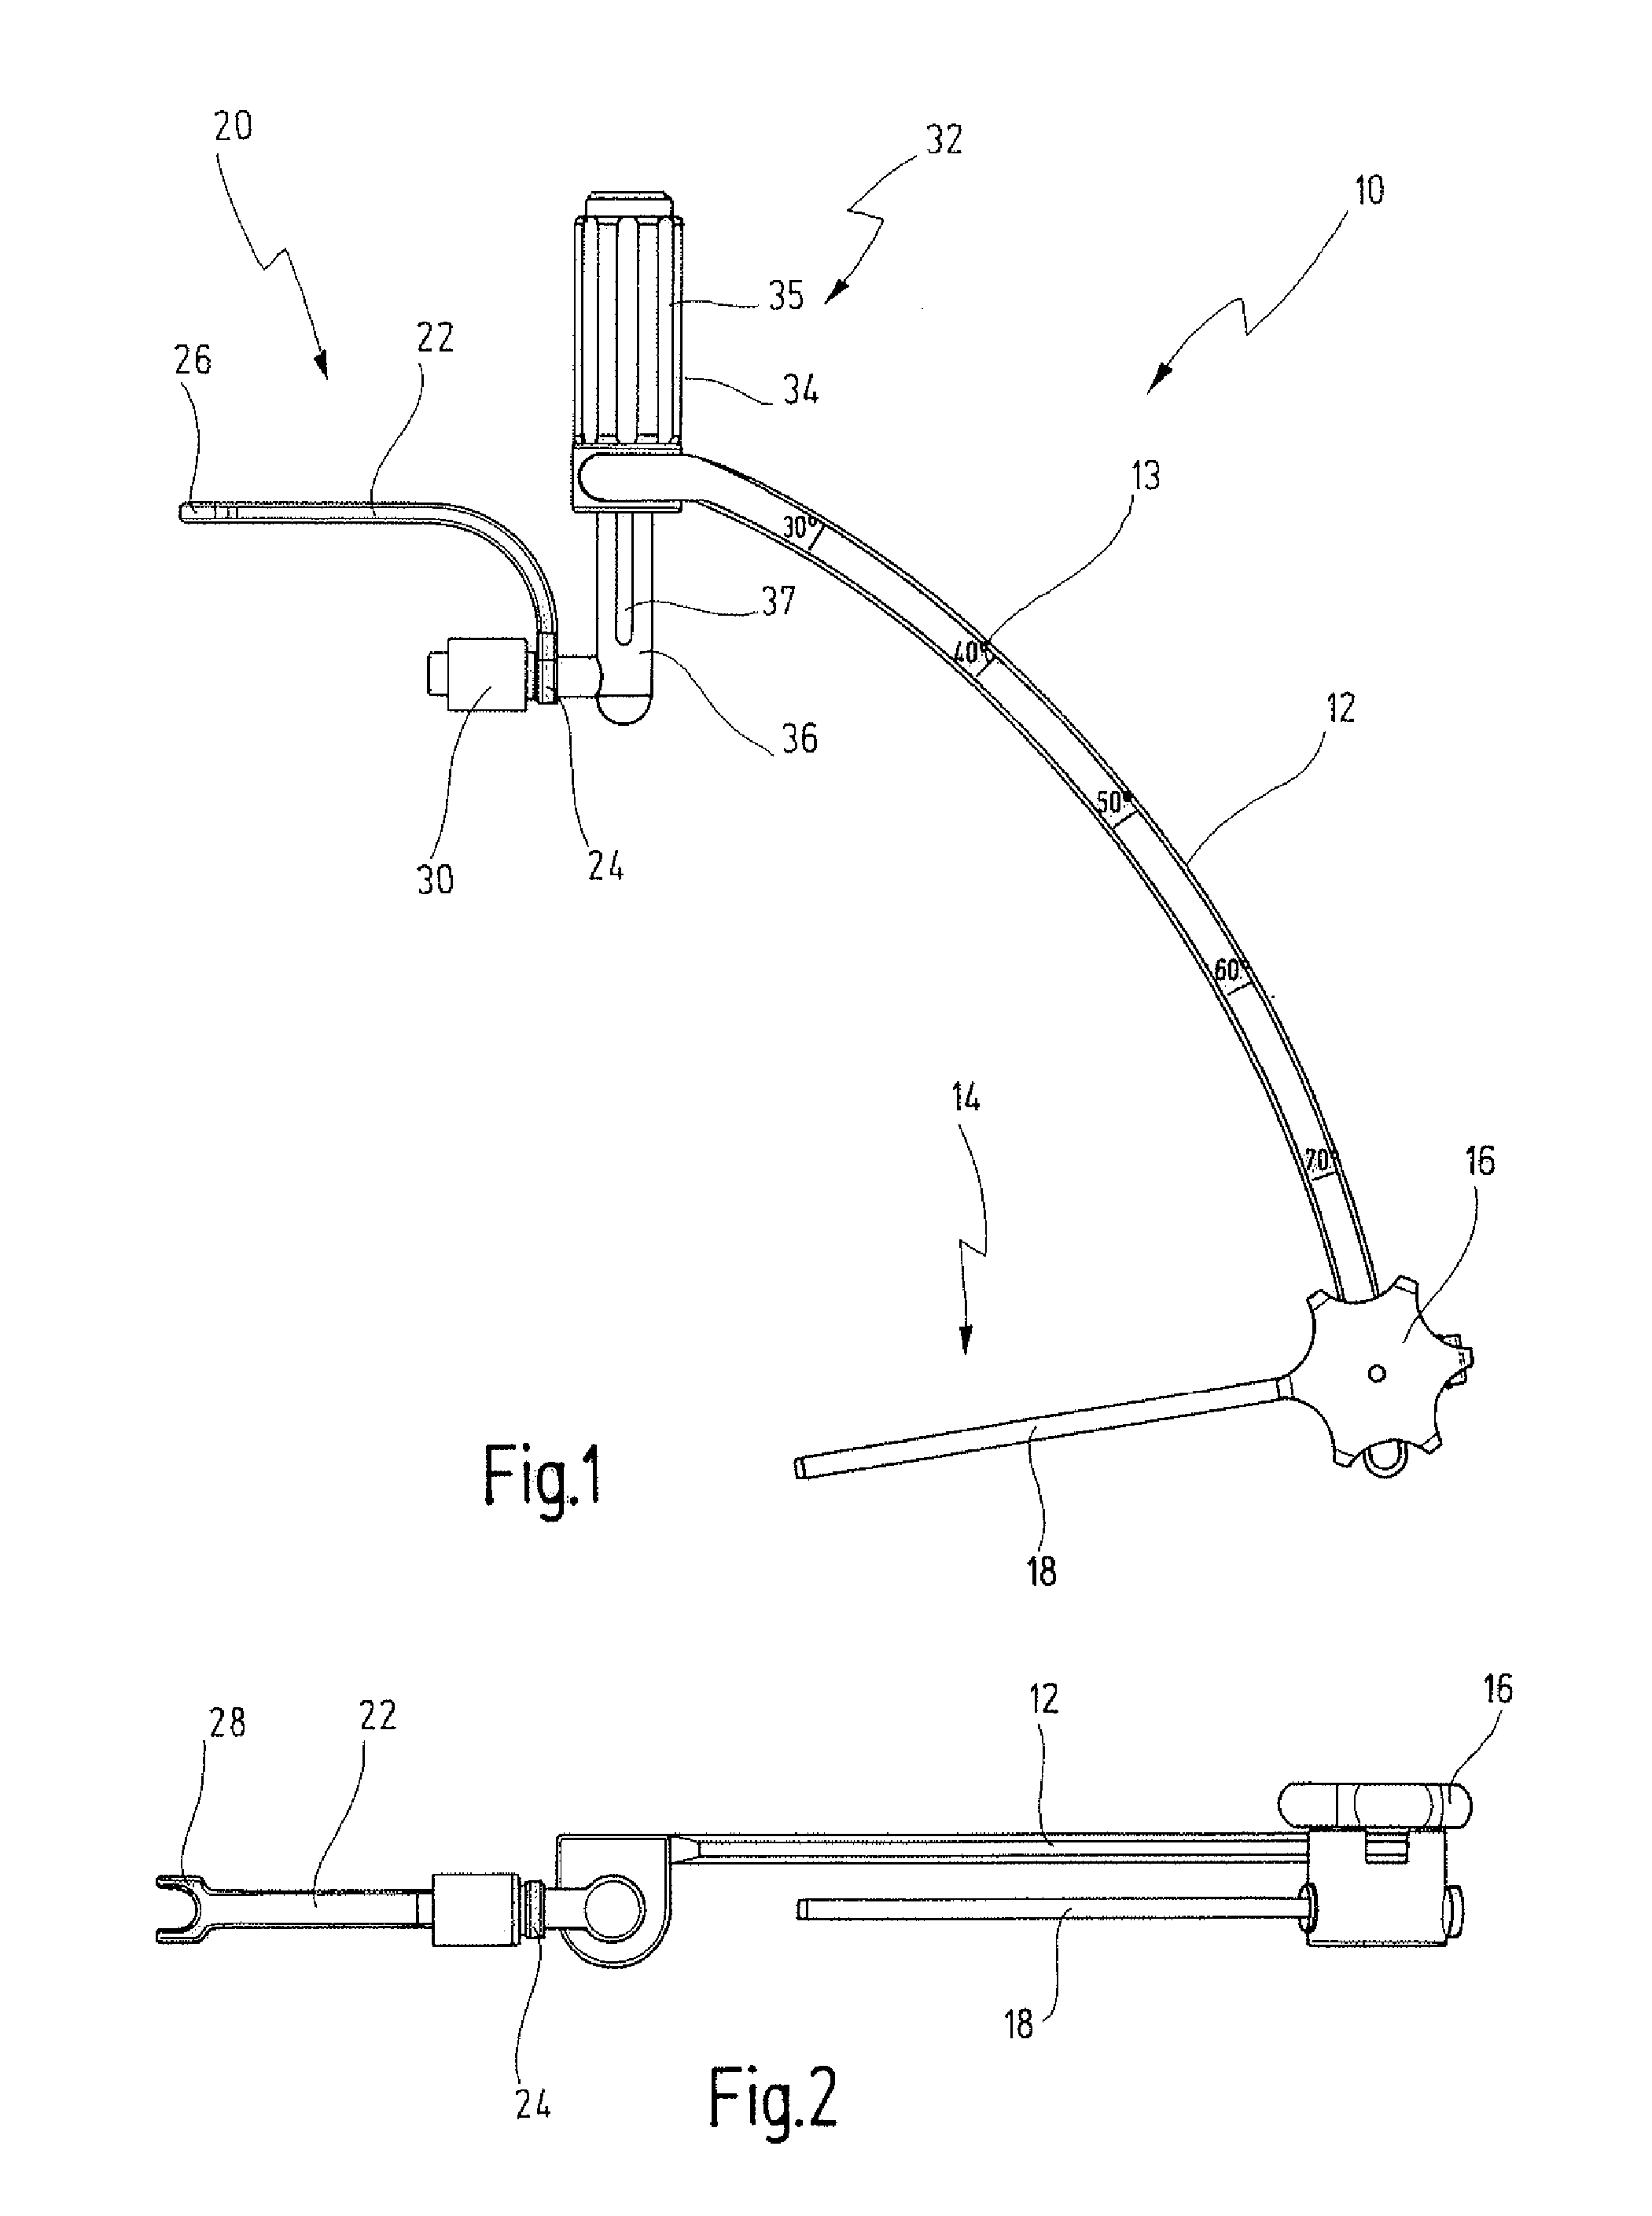 Partial Aiming Device For Targeting An Arthroscopic Operation Site For A Medical Intervention